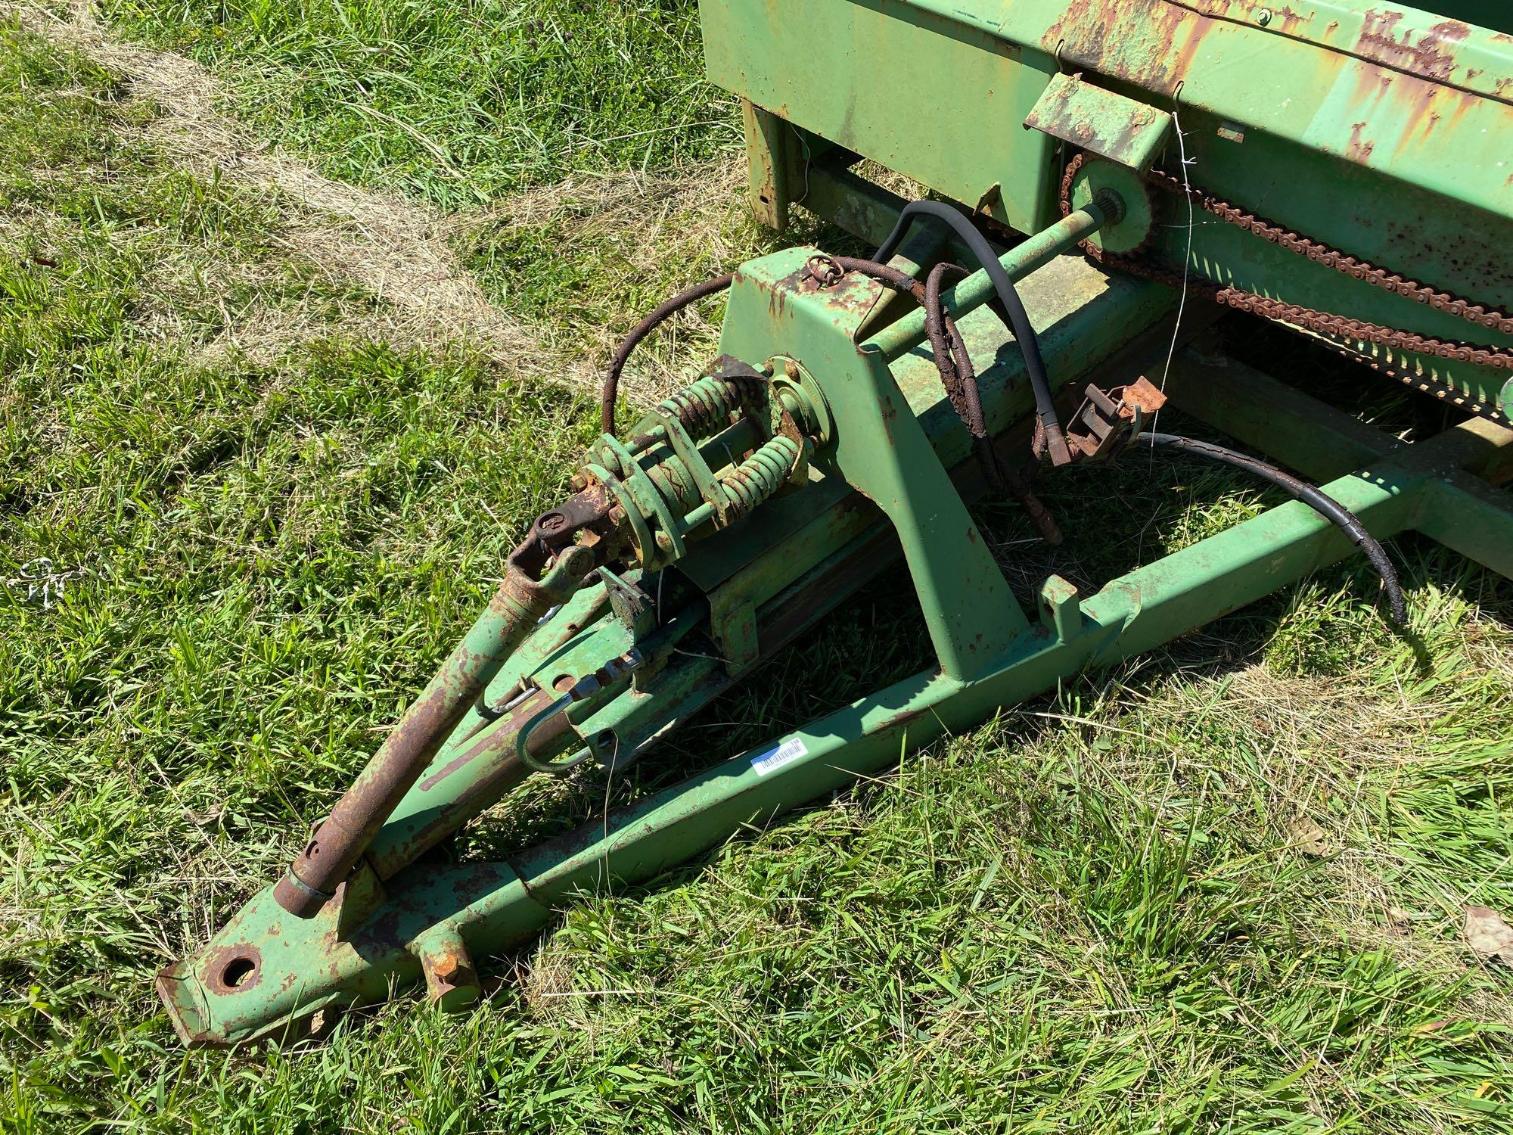 Image for John Deere PTO Driven Manure Spreader- Not Working